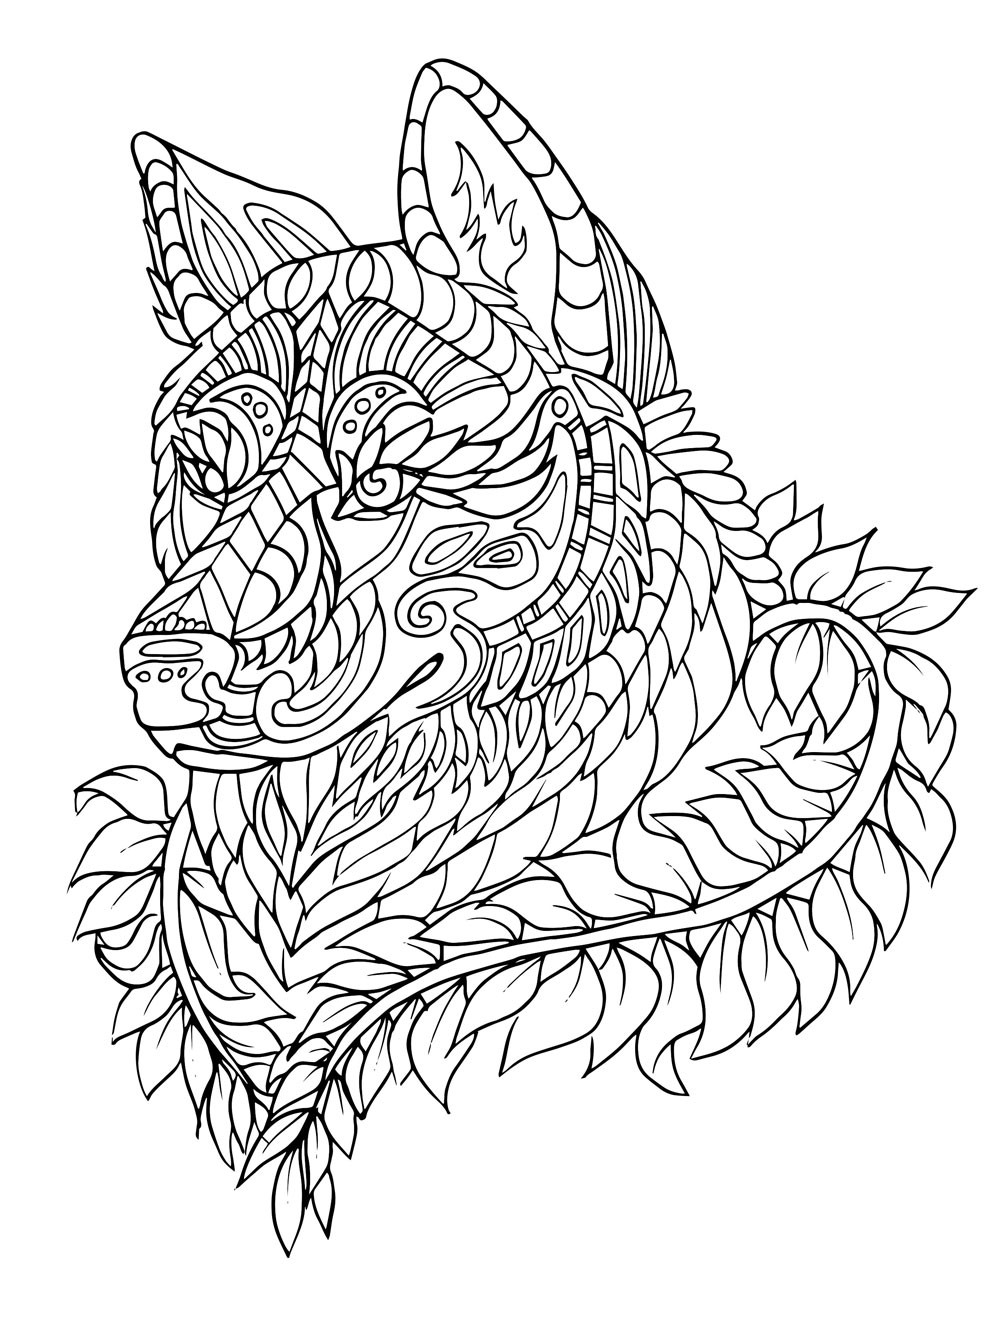 Stress Relief Printable Coloring Pages
 Stress Relief Coloring Pages Animals Free